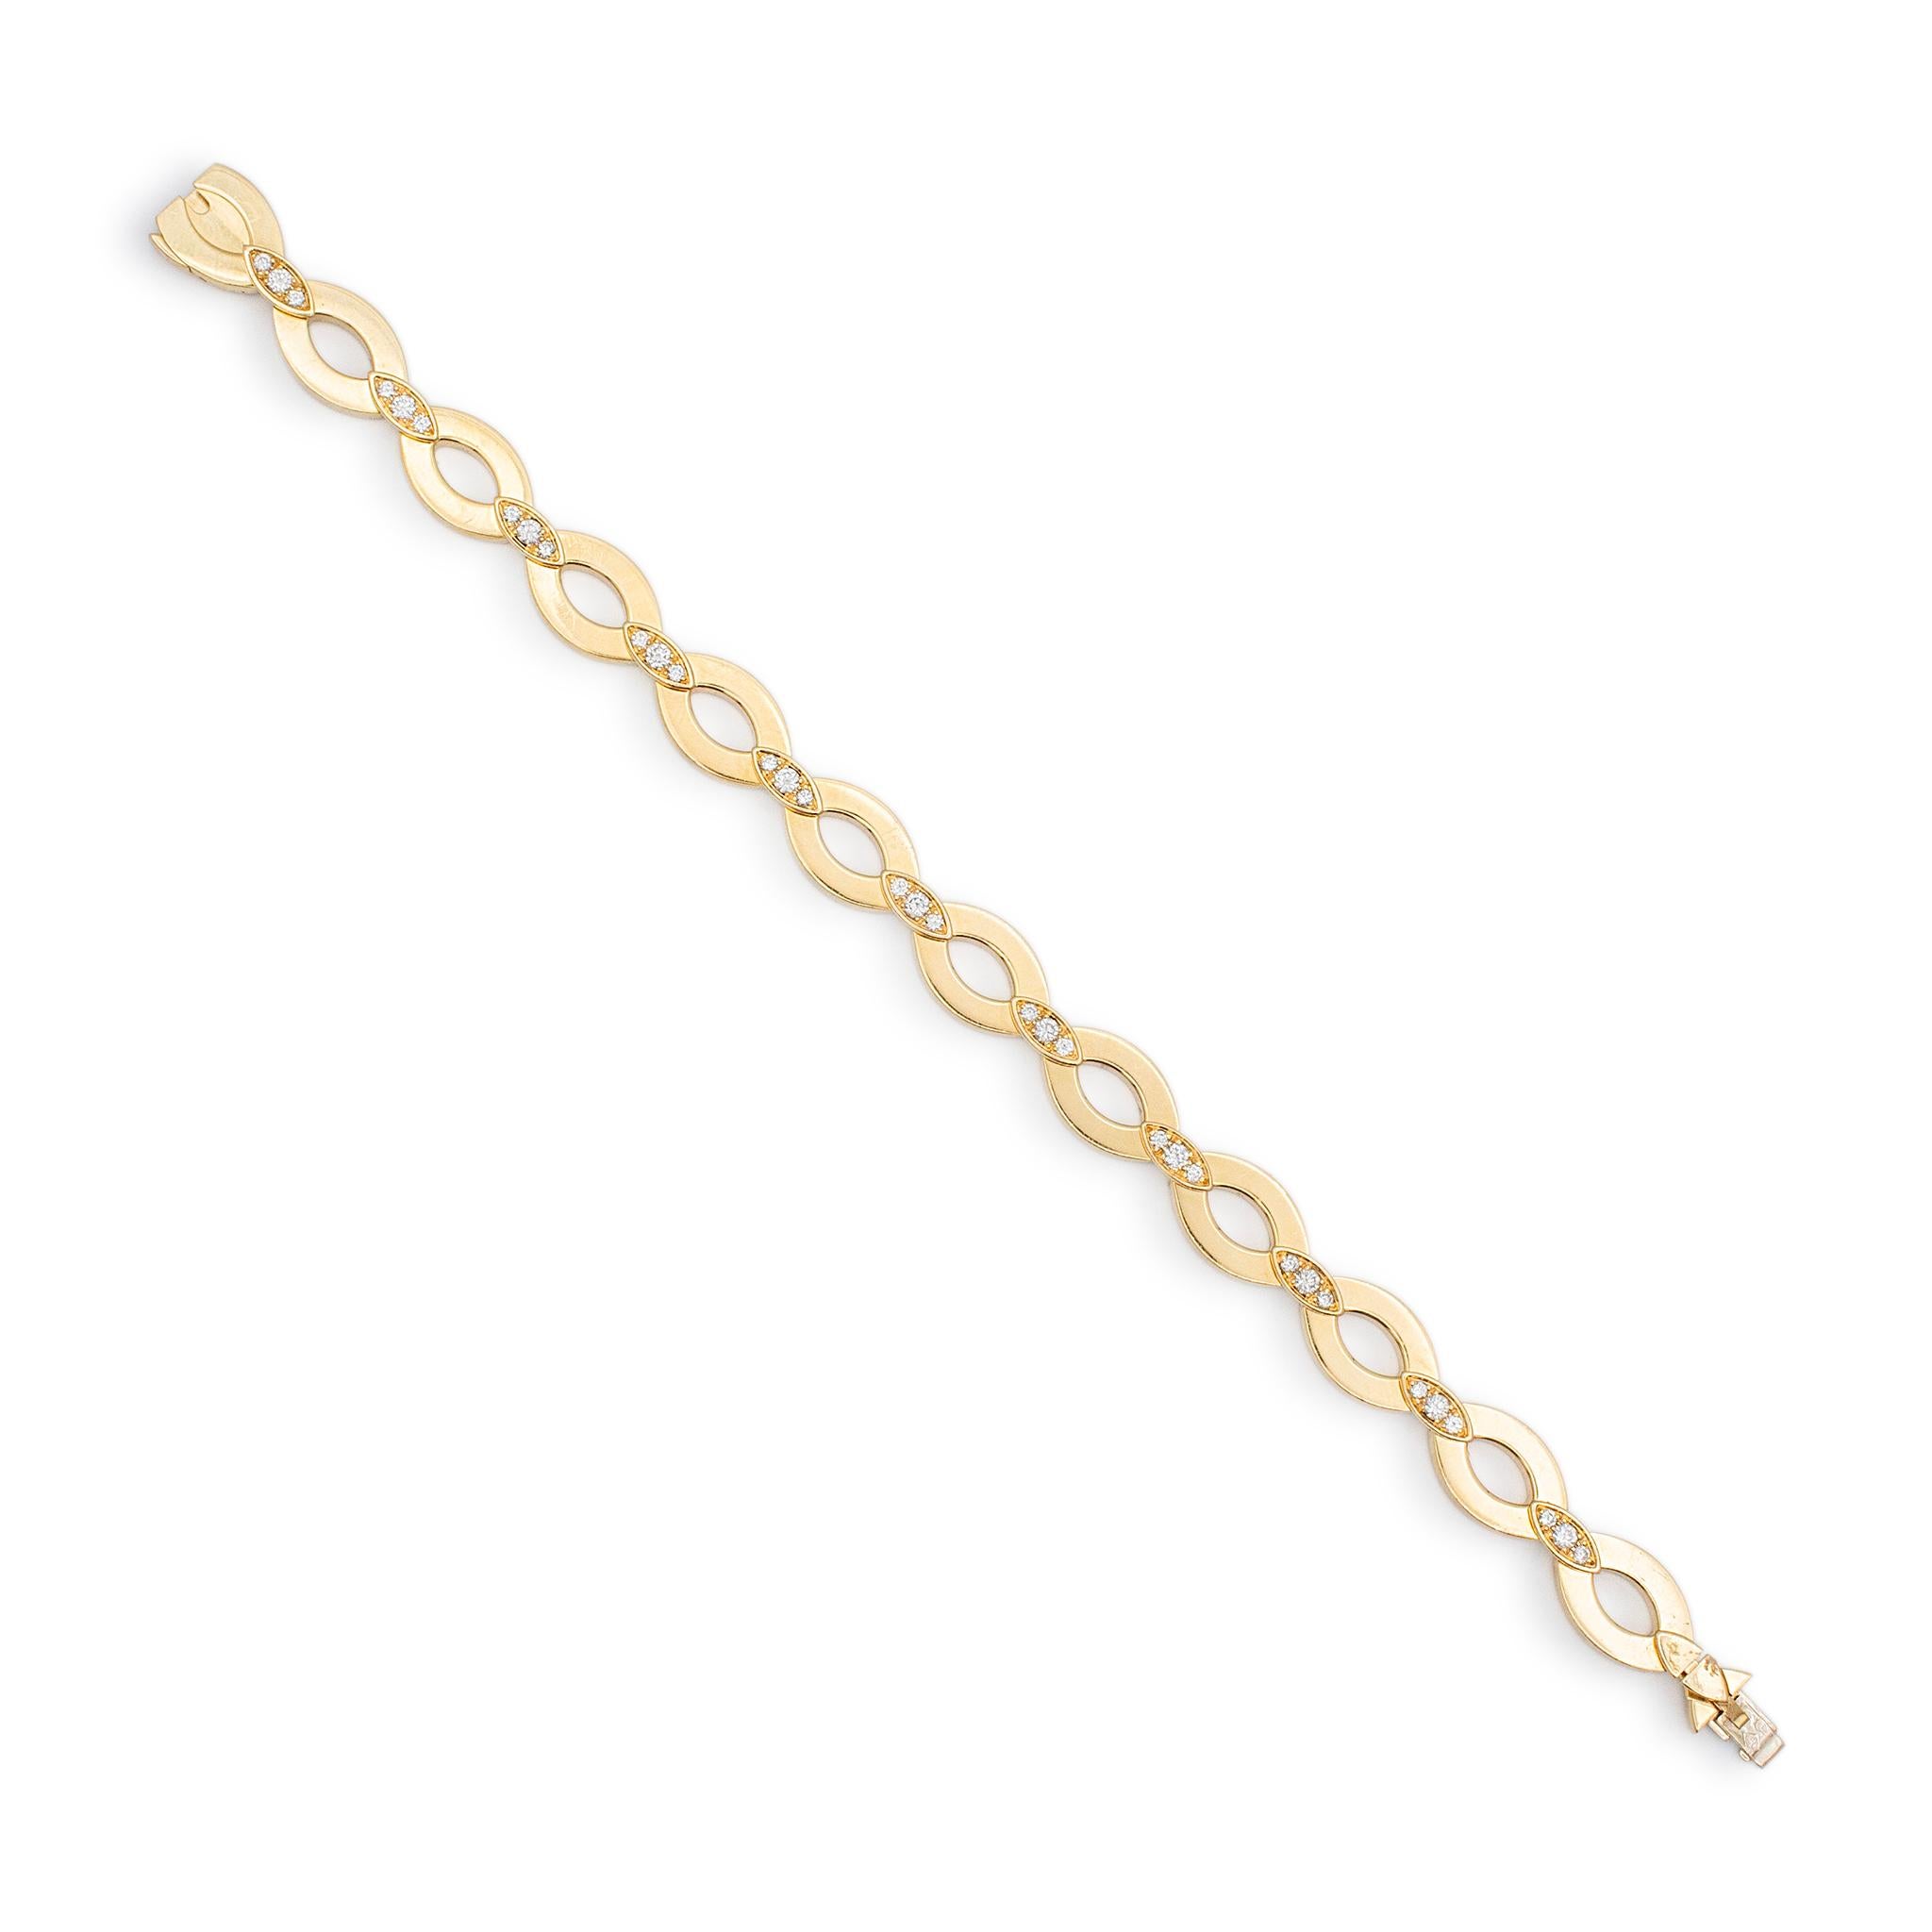 Brand: Cartier

Gender: Ladies

Metal Type: 18K Yellow Gold

Length: 6.50 inches

Width: 8.65 mm

Weight: 35.79 grams

Ladies designer made 18K yellow gold, diamond link bracelet. The metal was tested and determined to be 18K yellow gold. Engraved